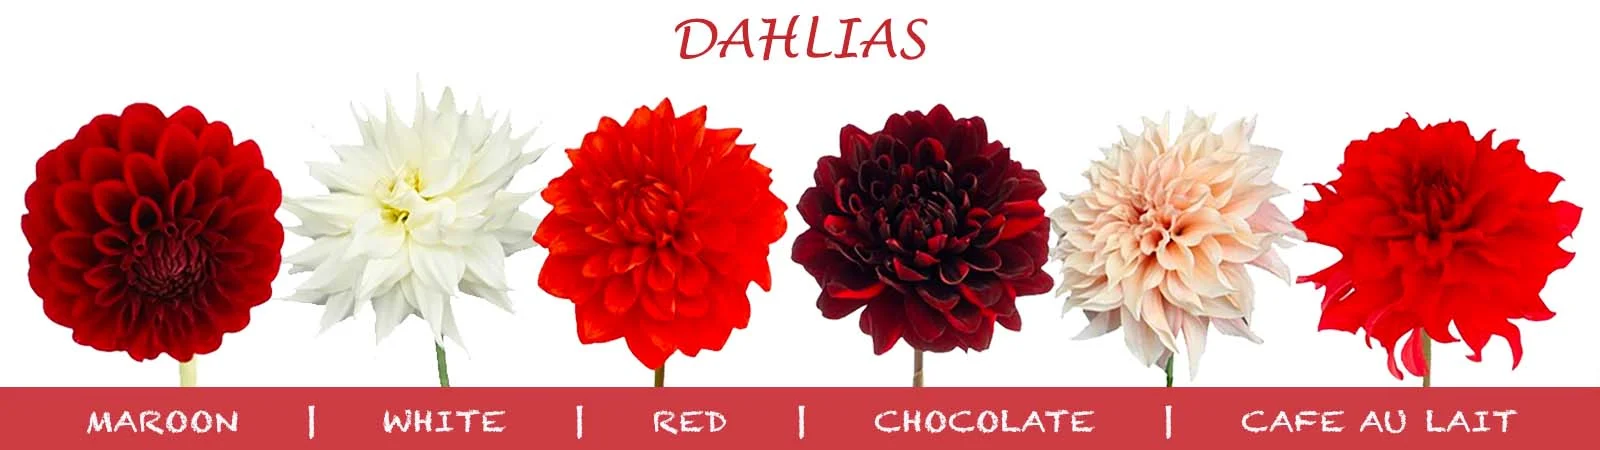 Affordable, vibrant dahlias in bulk, adding a festive flourish and exceptional value to holiday deco